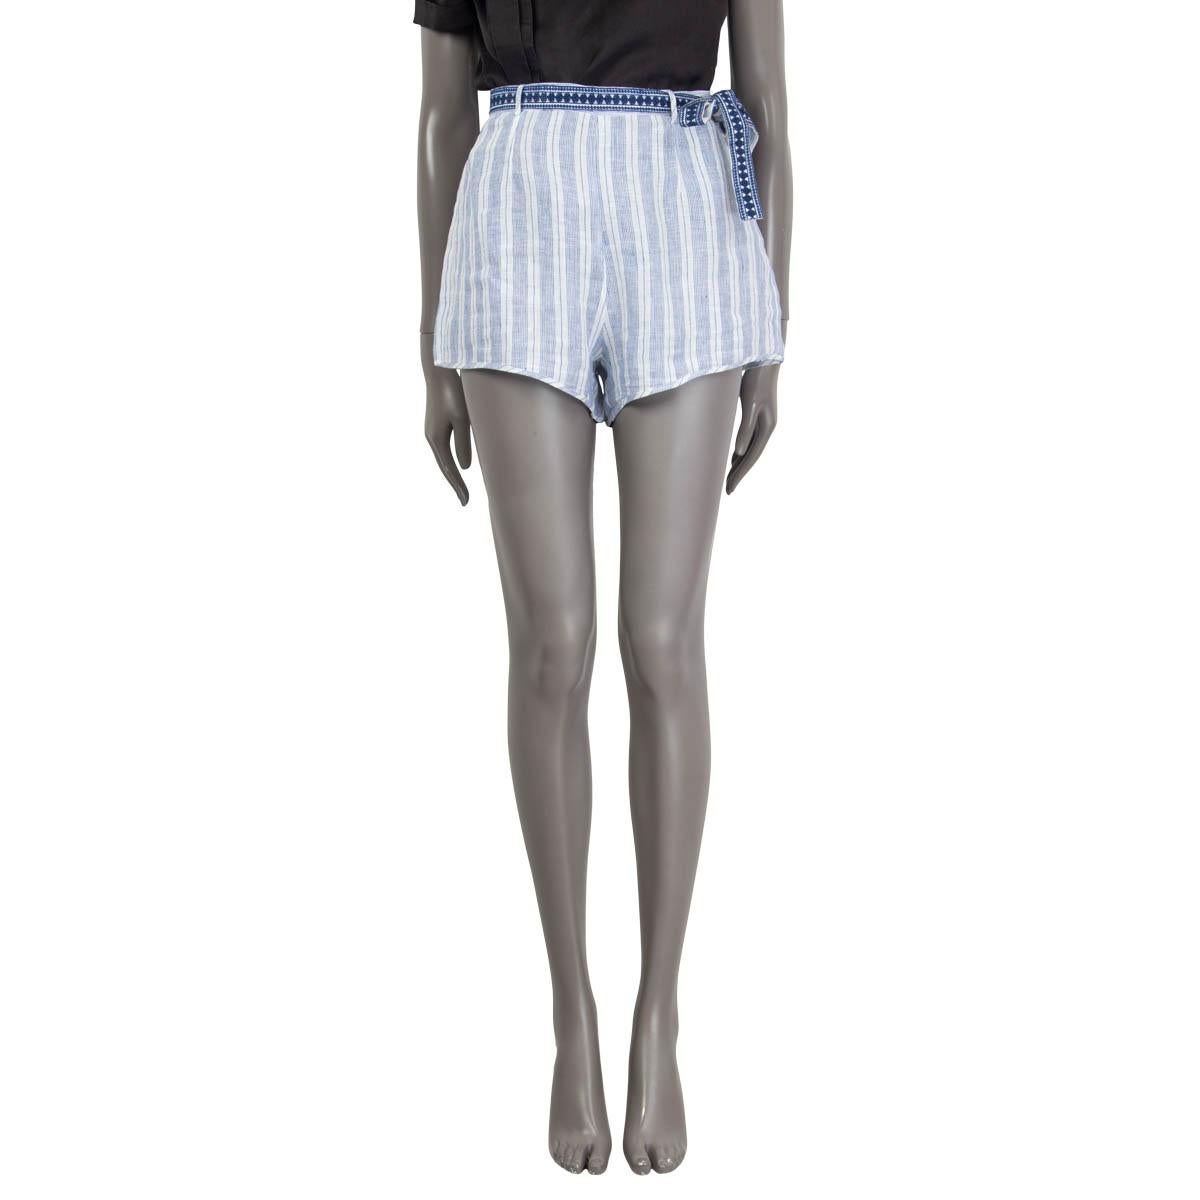 100% authentic Ermanno Scervino Life belted shorts in blue and white linen (100%). Open with a zipper at the side. Unlined. Have been worn and are in excellent condition. Matching top, flats and dress available in separate listing.